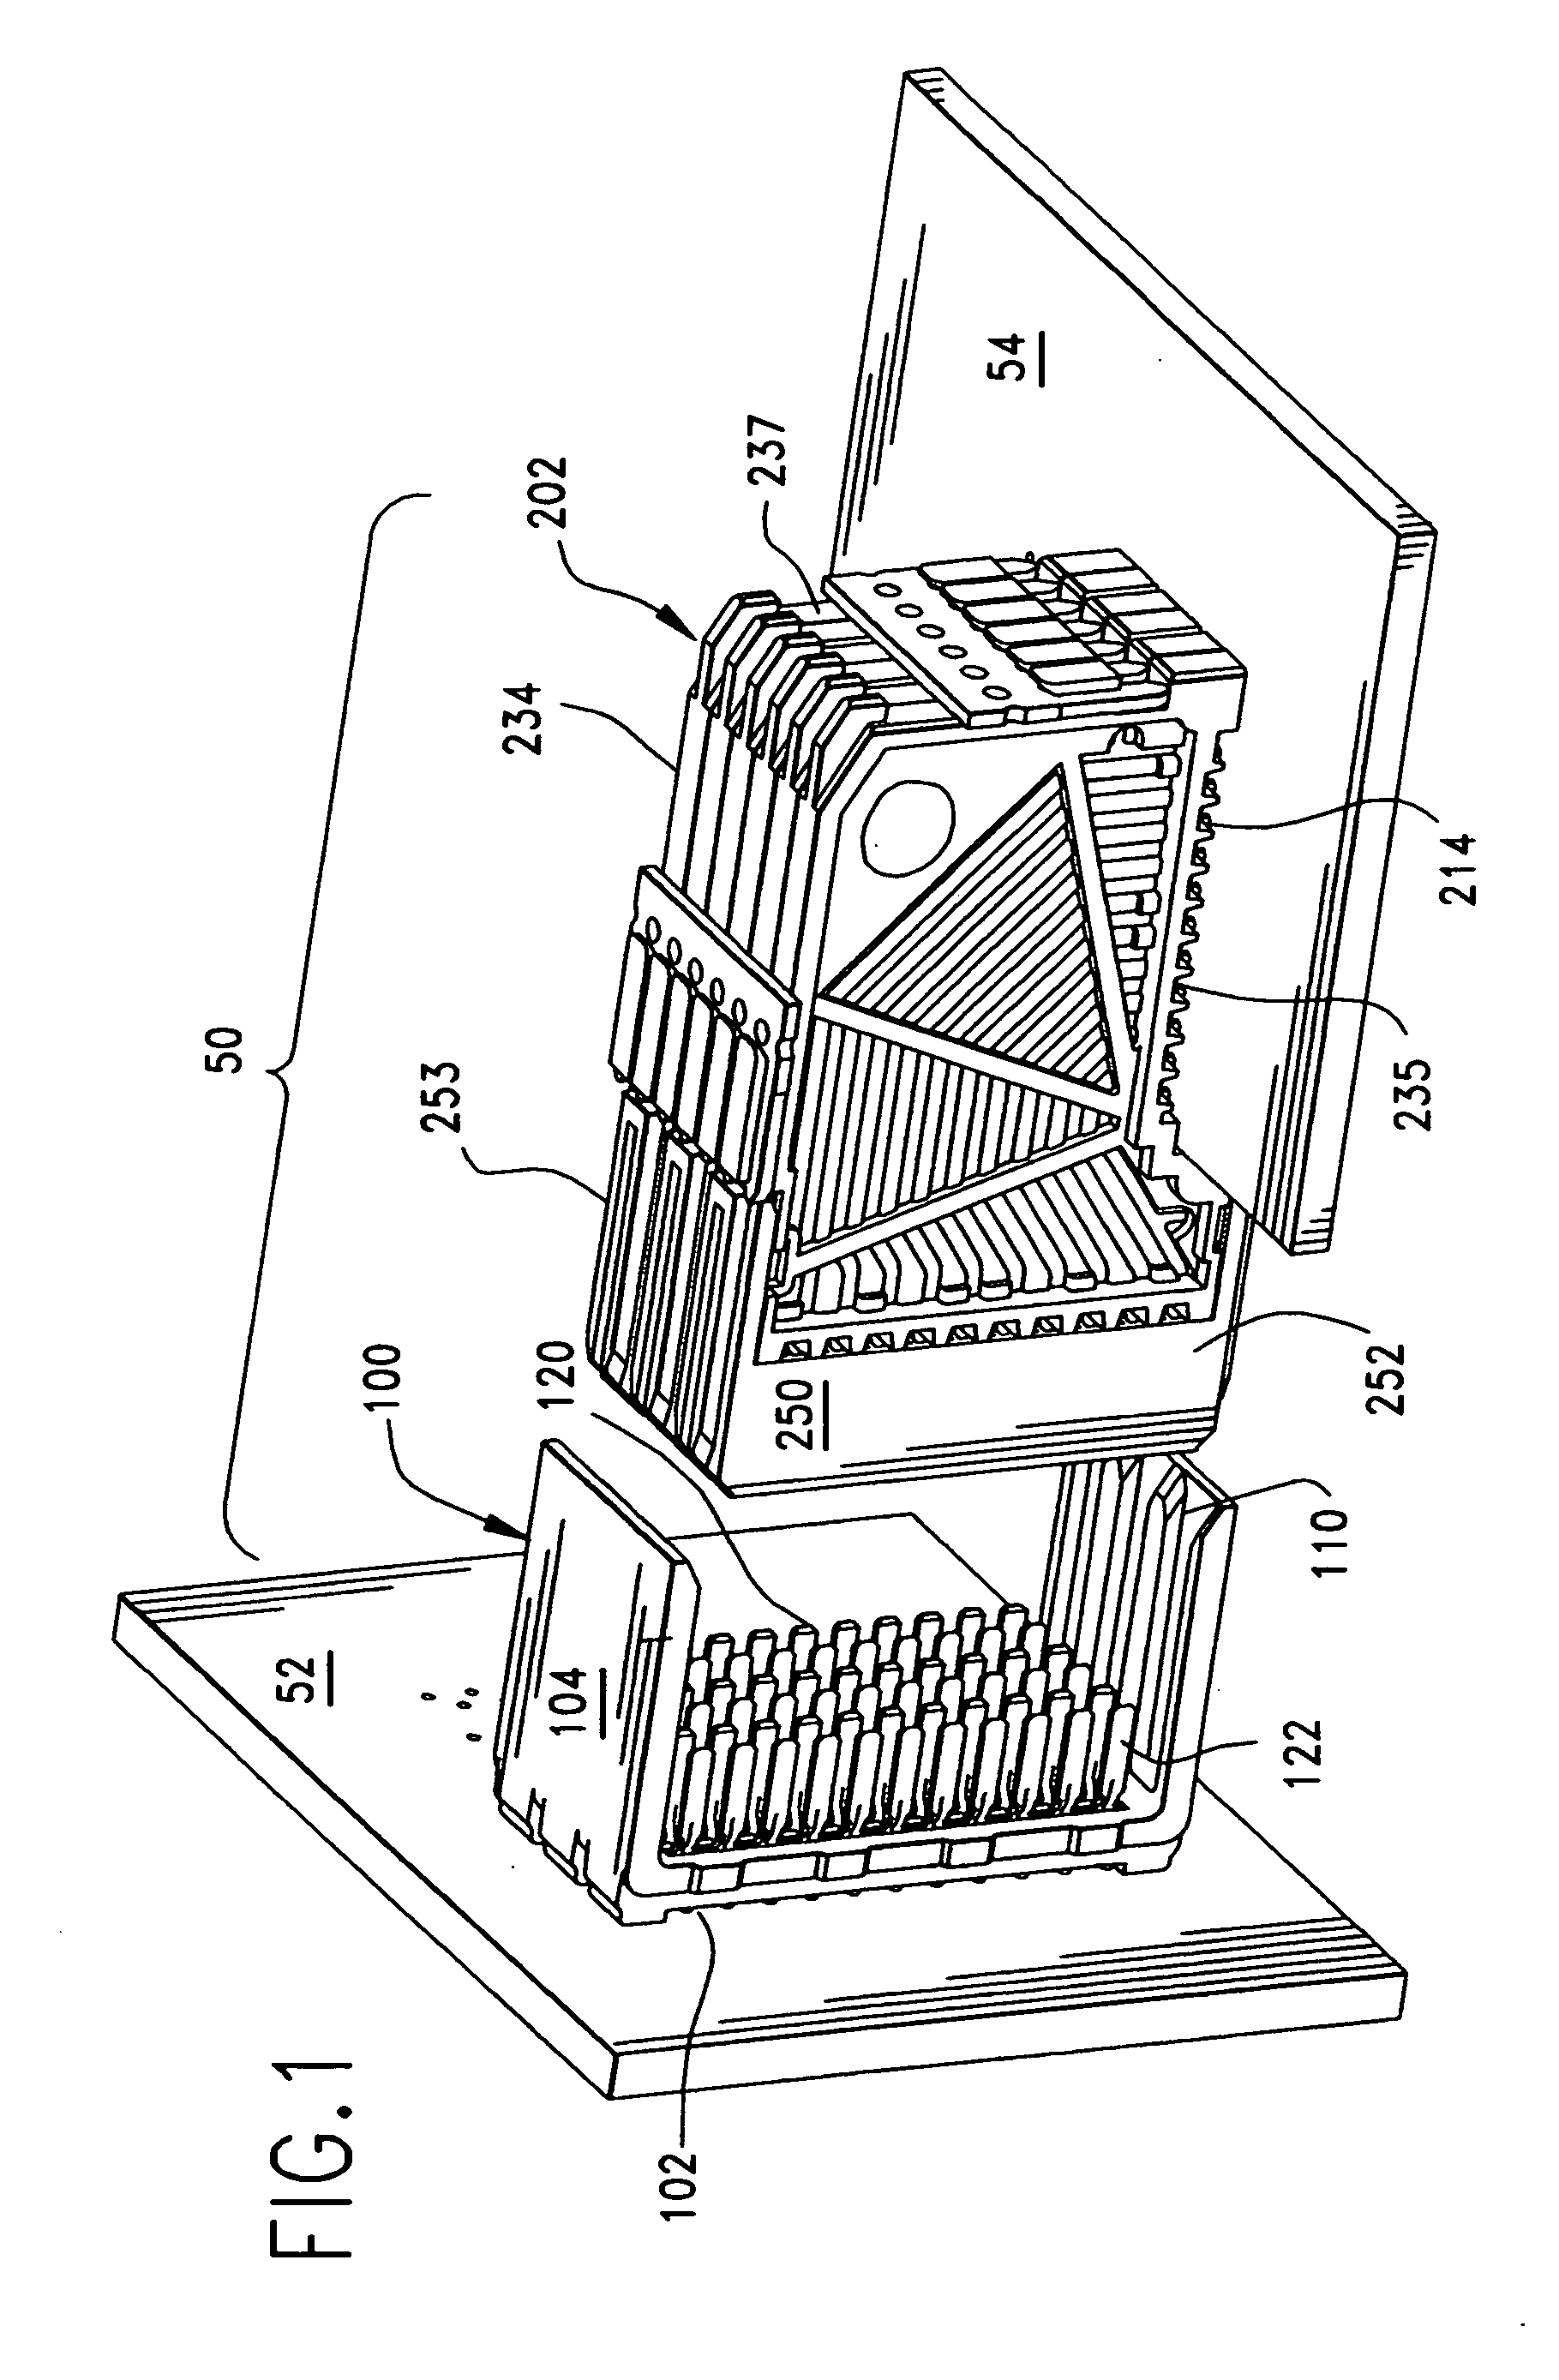 High-density, robust connector